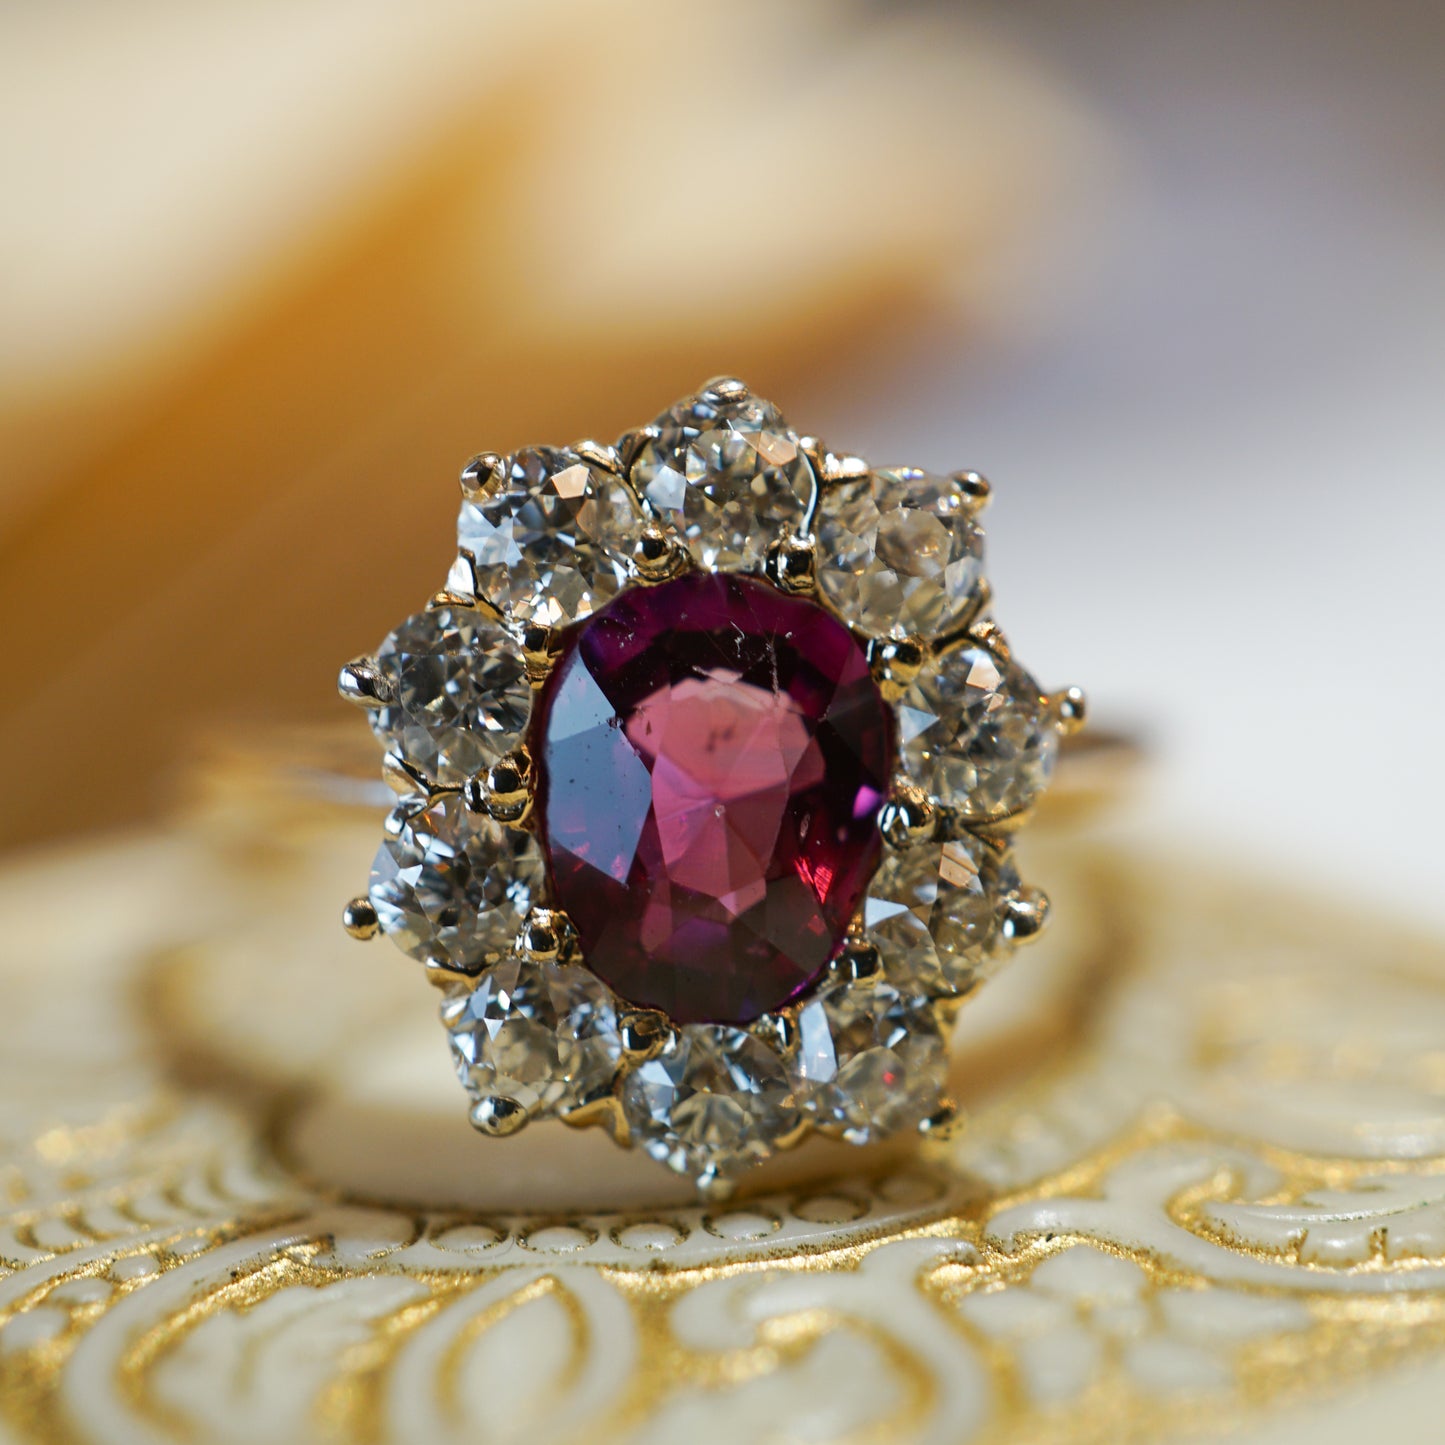 Victorian Pink Sapphire & Diamond Ring in 14k Yellow Gold